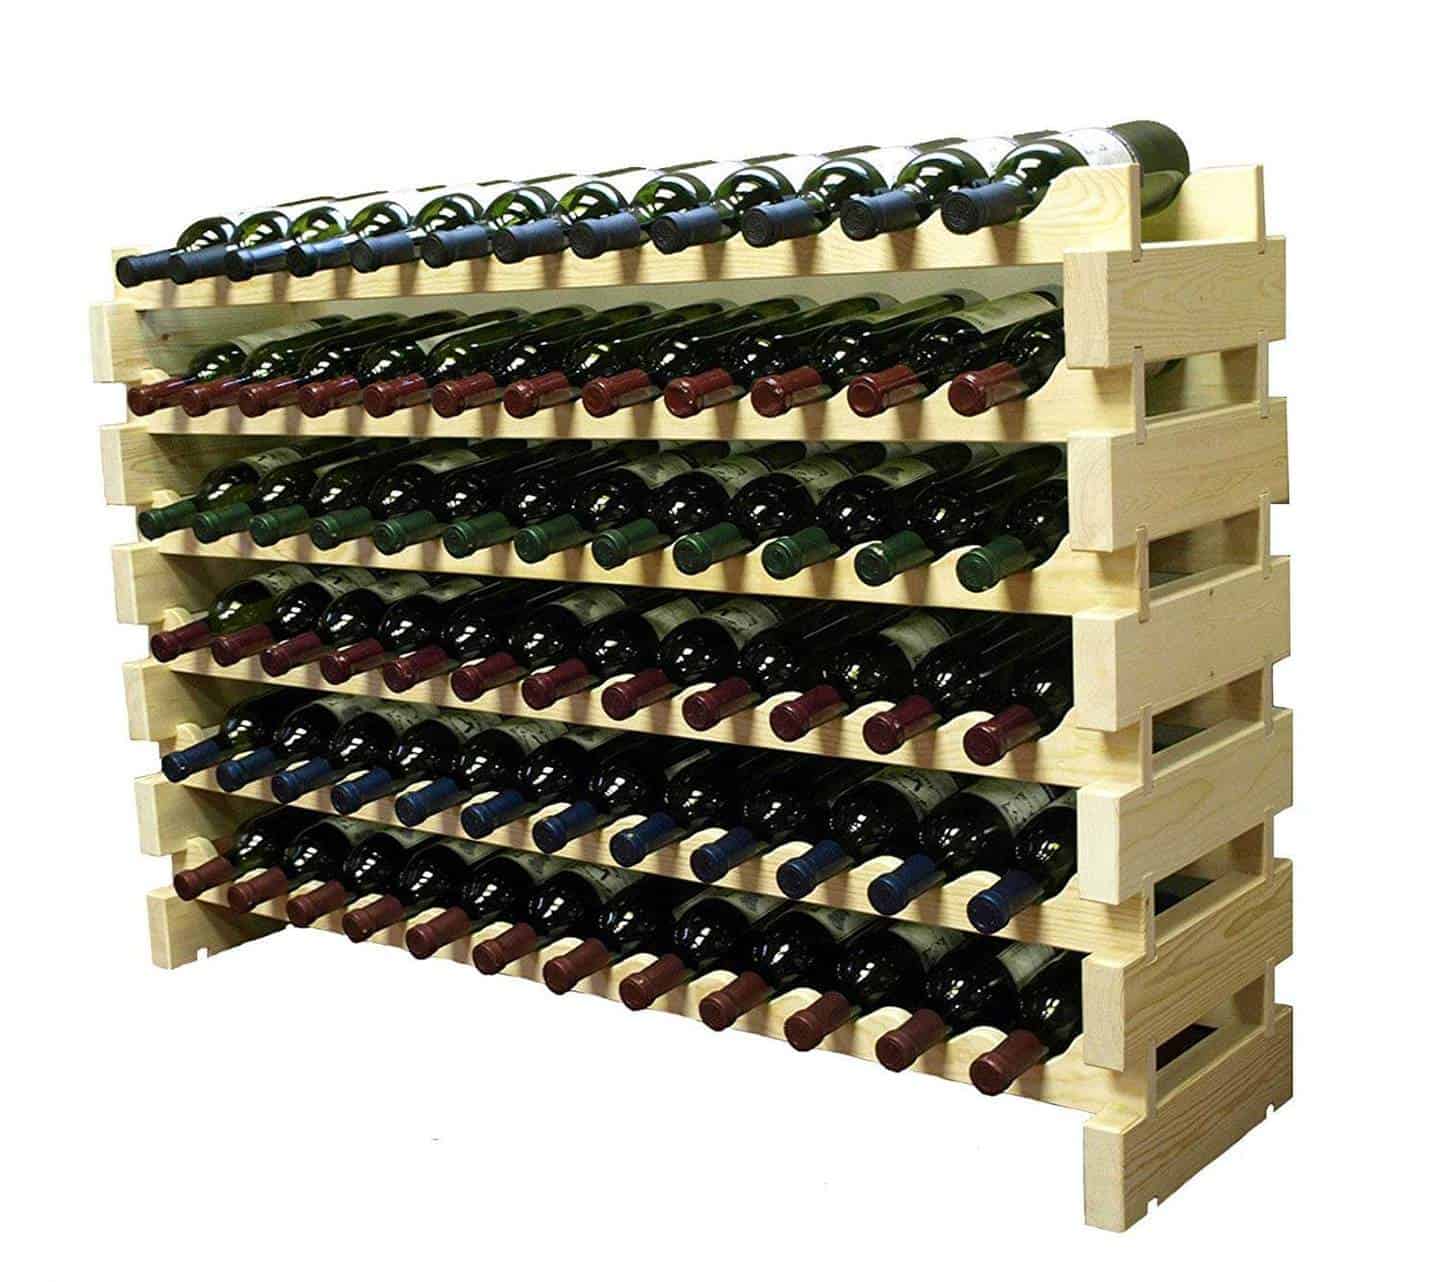 The Stylish Wine Rack Anyone Can Make By Saving Their Leftover Soup Cans